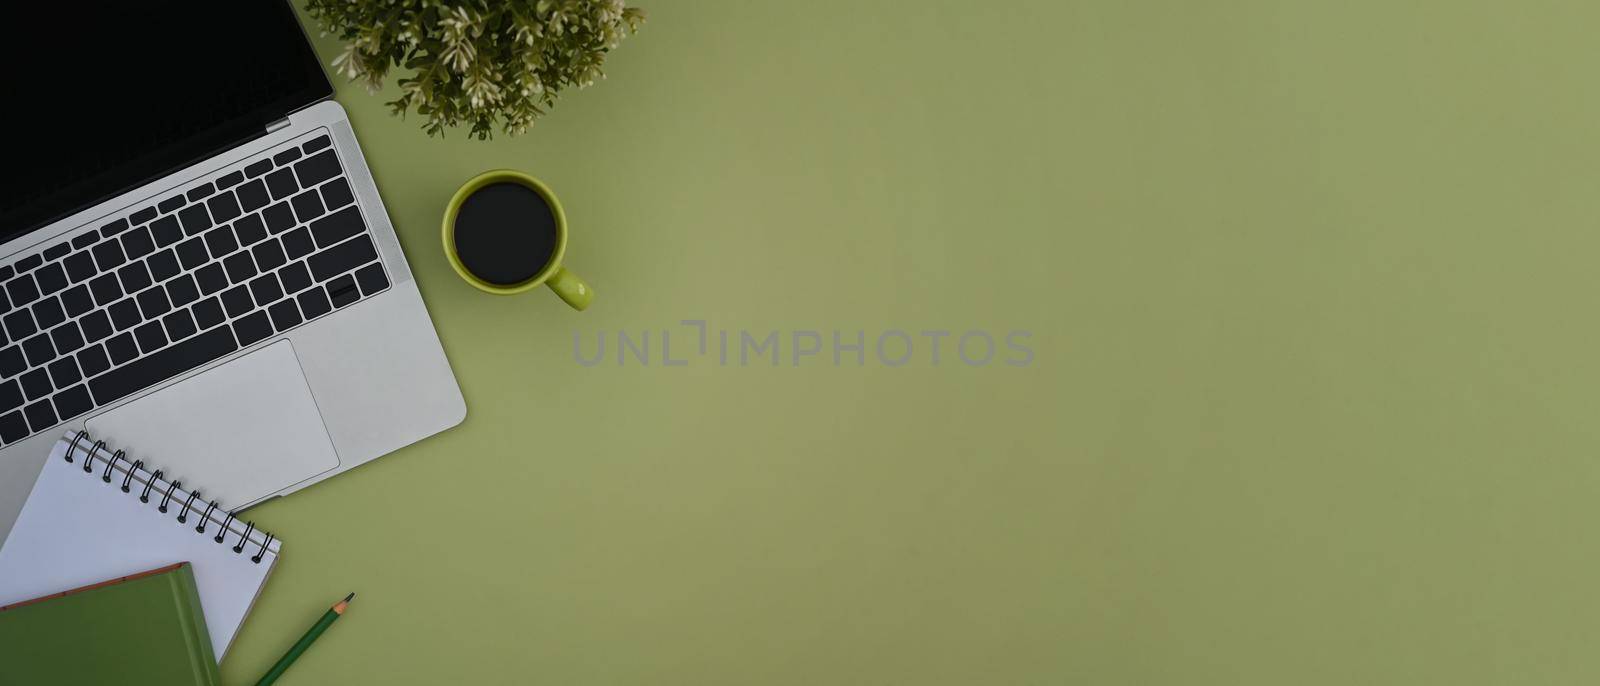 Top view laptop, notebook, coffee cup and potted plant on green background with copy space. by prathanchorruangsak